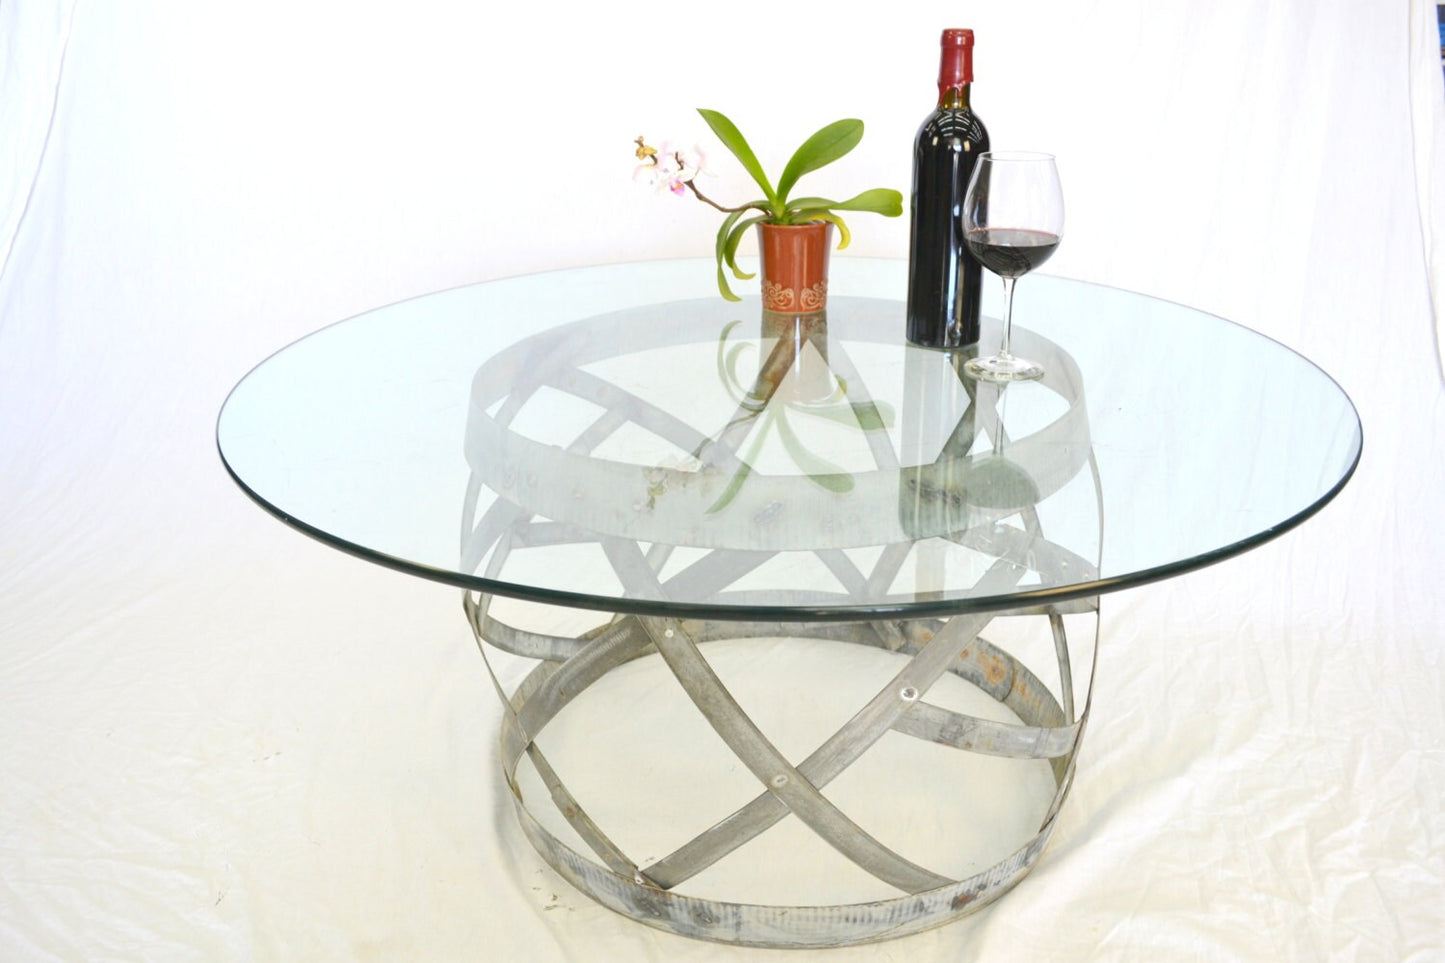 Wine Barrel Ring Coffee Table - Tanovi - made from retired Napa wine barrel rings. 100% Recycled!